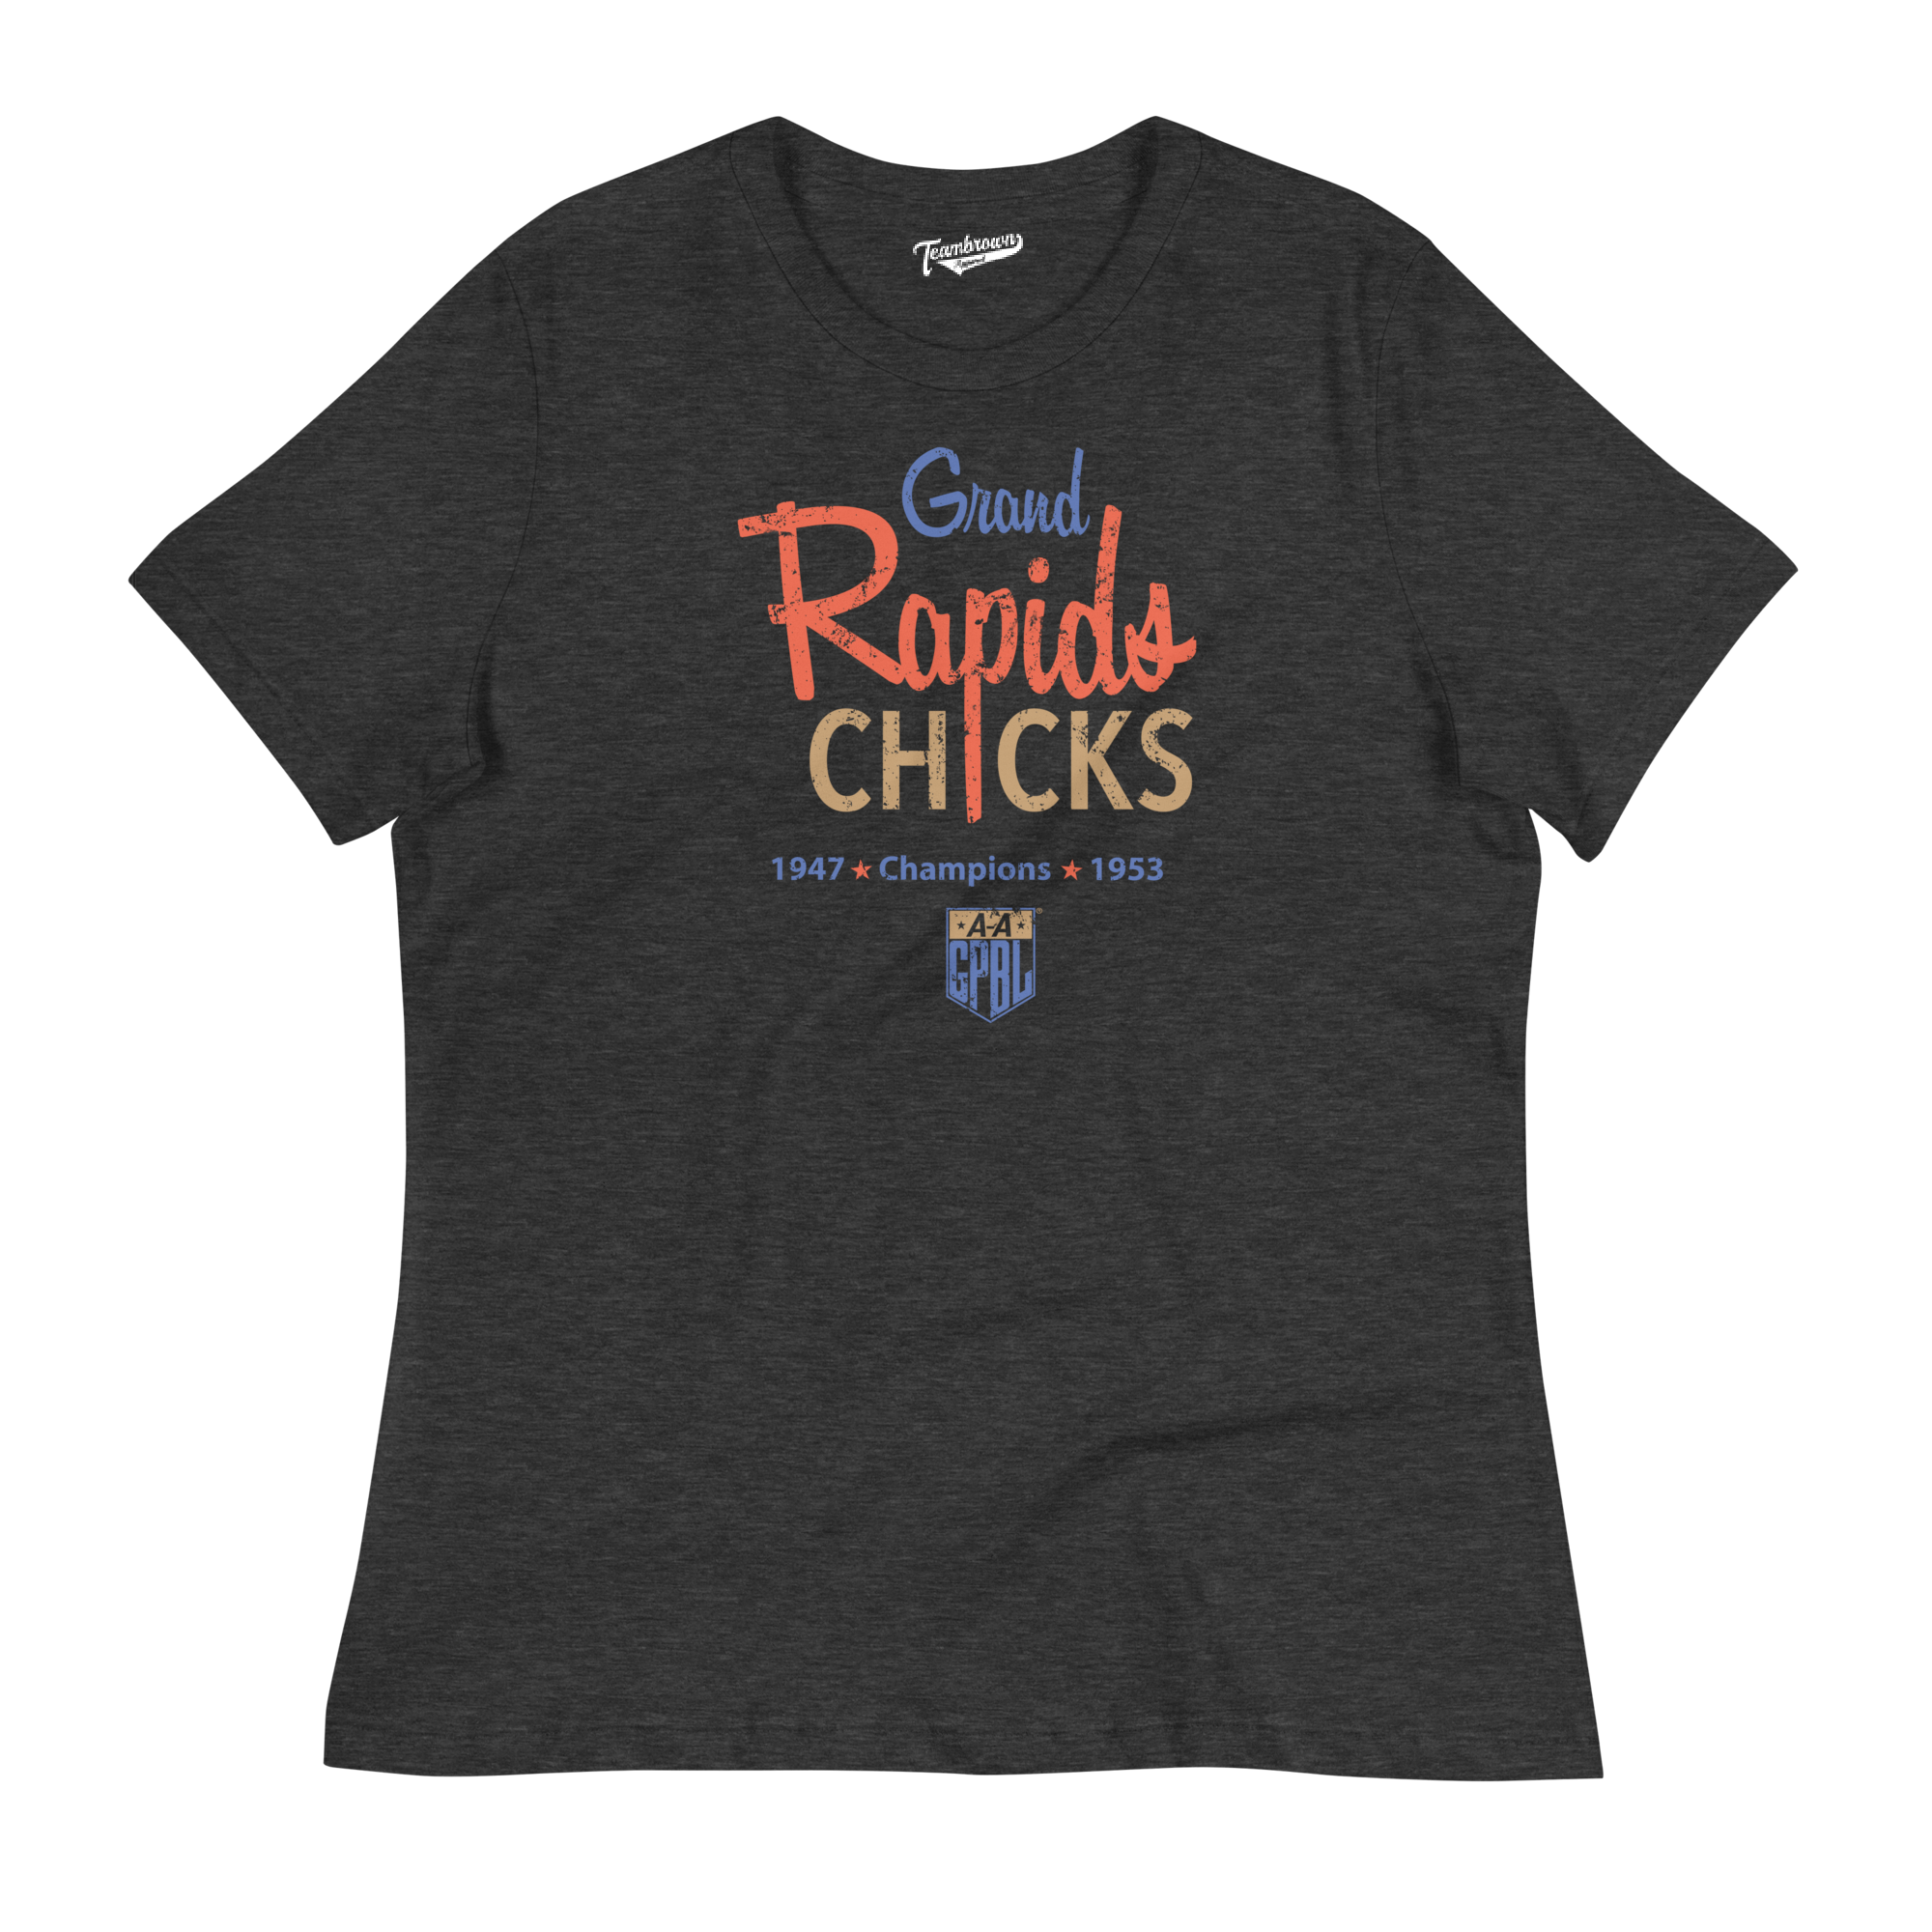 Grand Rapids Chicks Champions - Women's Relaxed Fit T-Shirt | Officially Licensed - AAGPBL